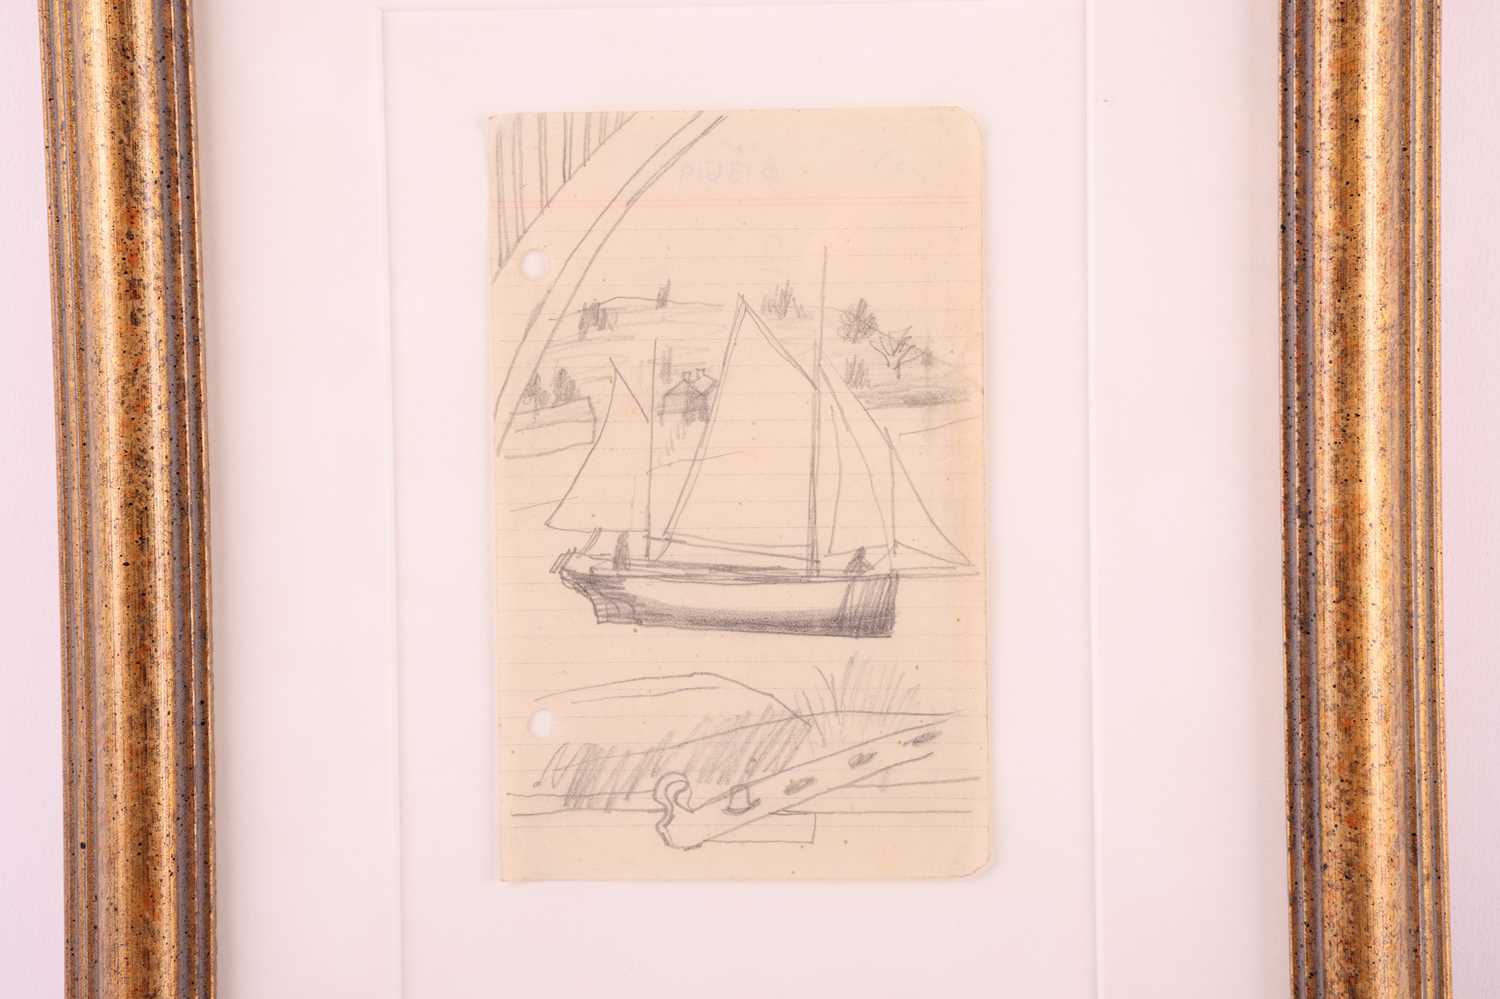 Ben Nicholson (1894-1982), Sailing boat through a window, Isle of Wight, unsigned, pencil on notepap - Image 3 of 6